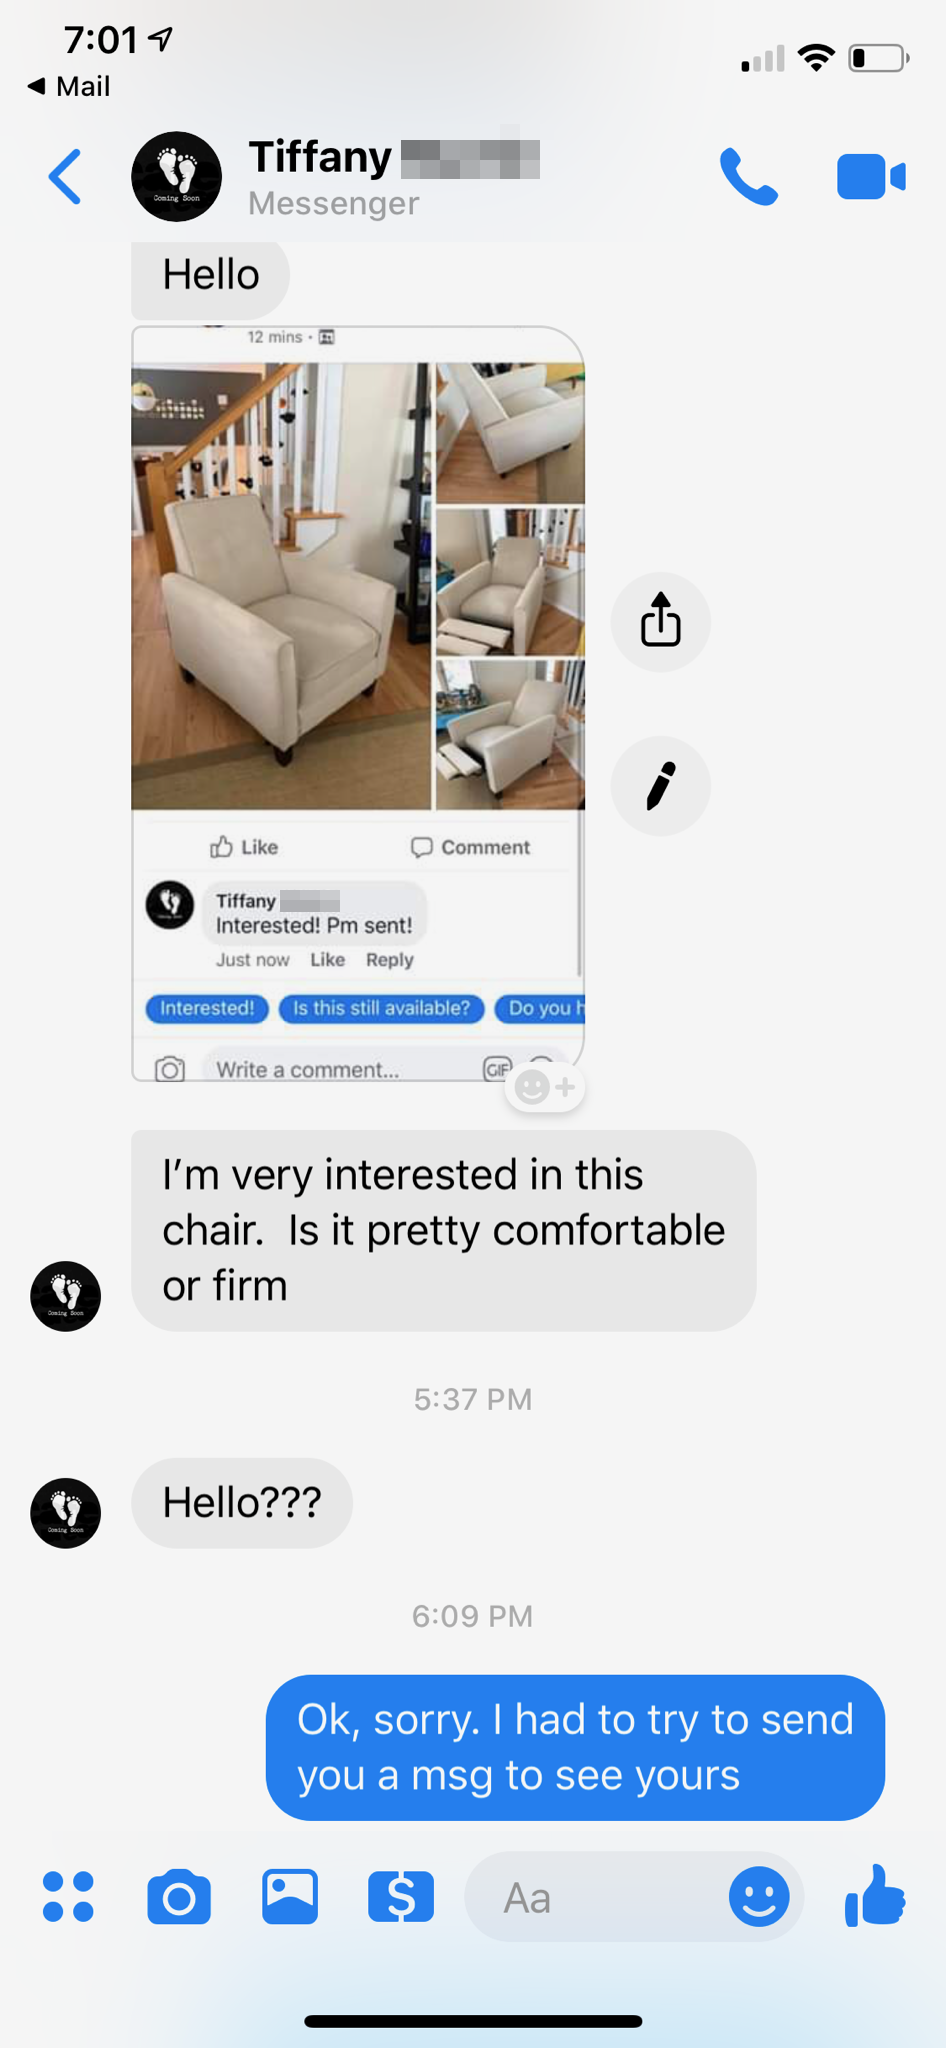 screenshot - Mail Tiffany Messenger Hello Is I'm very interested in this chair. Is it pretty comfortable or firm 37 Pm Hello??? Ok, sorry. I had to try to send you a msg to see yours O Ar